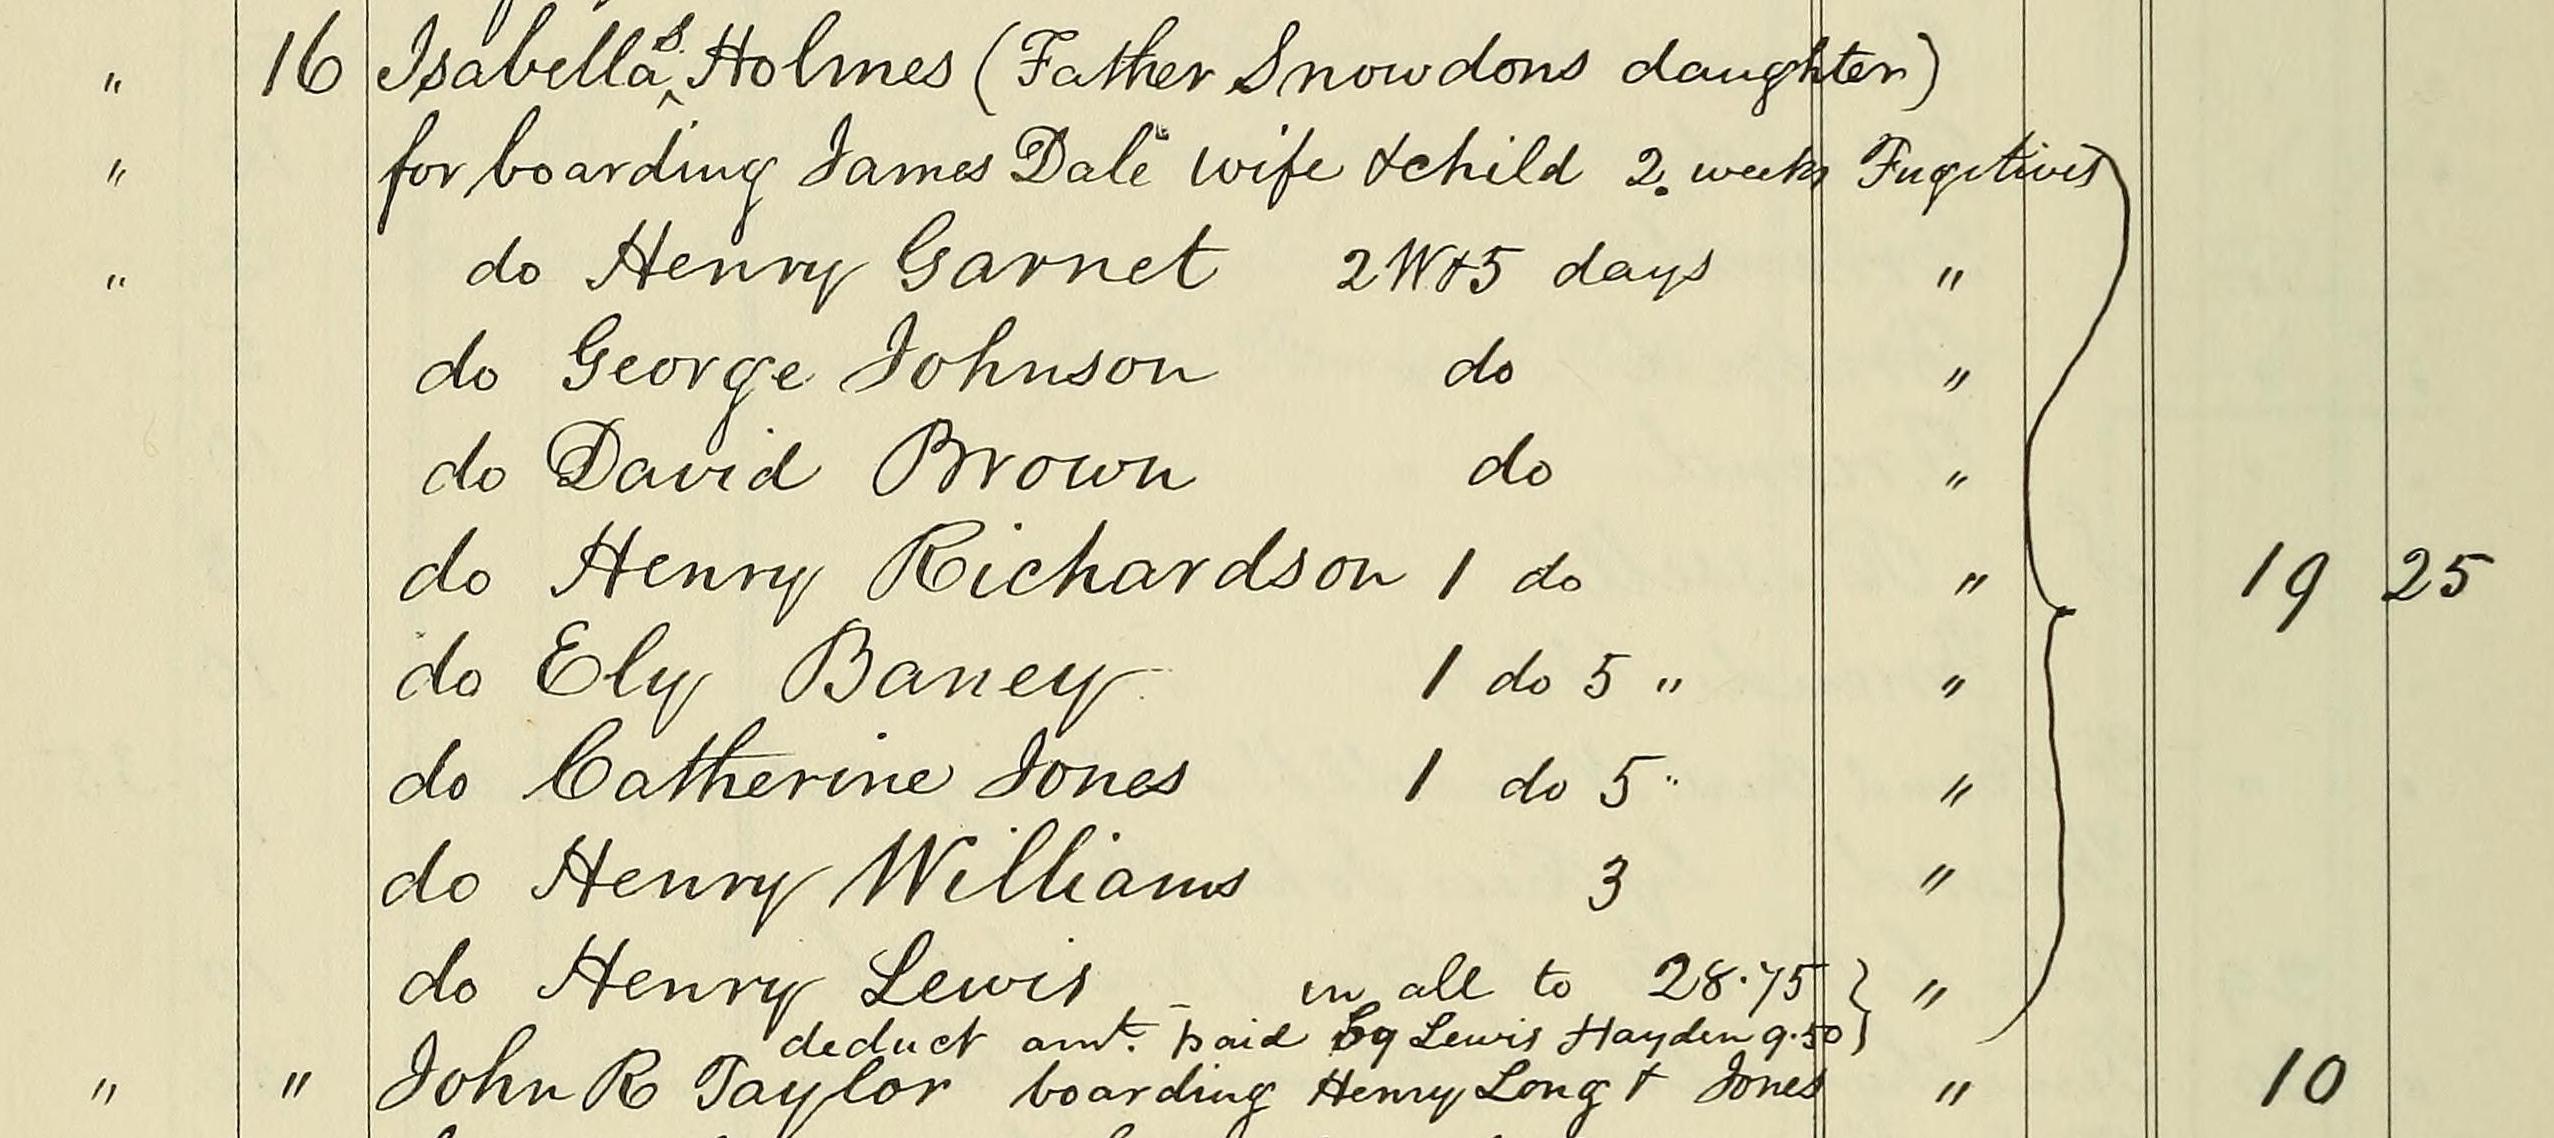 Selection of the Account Book of the Vigilance Committee that lists several names under Isabella Holmes.